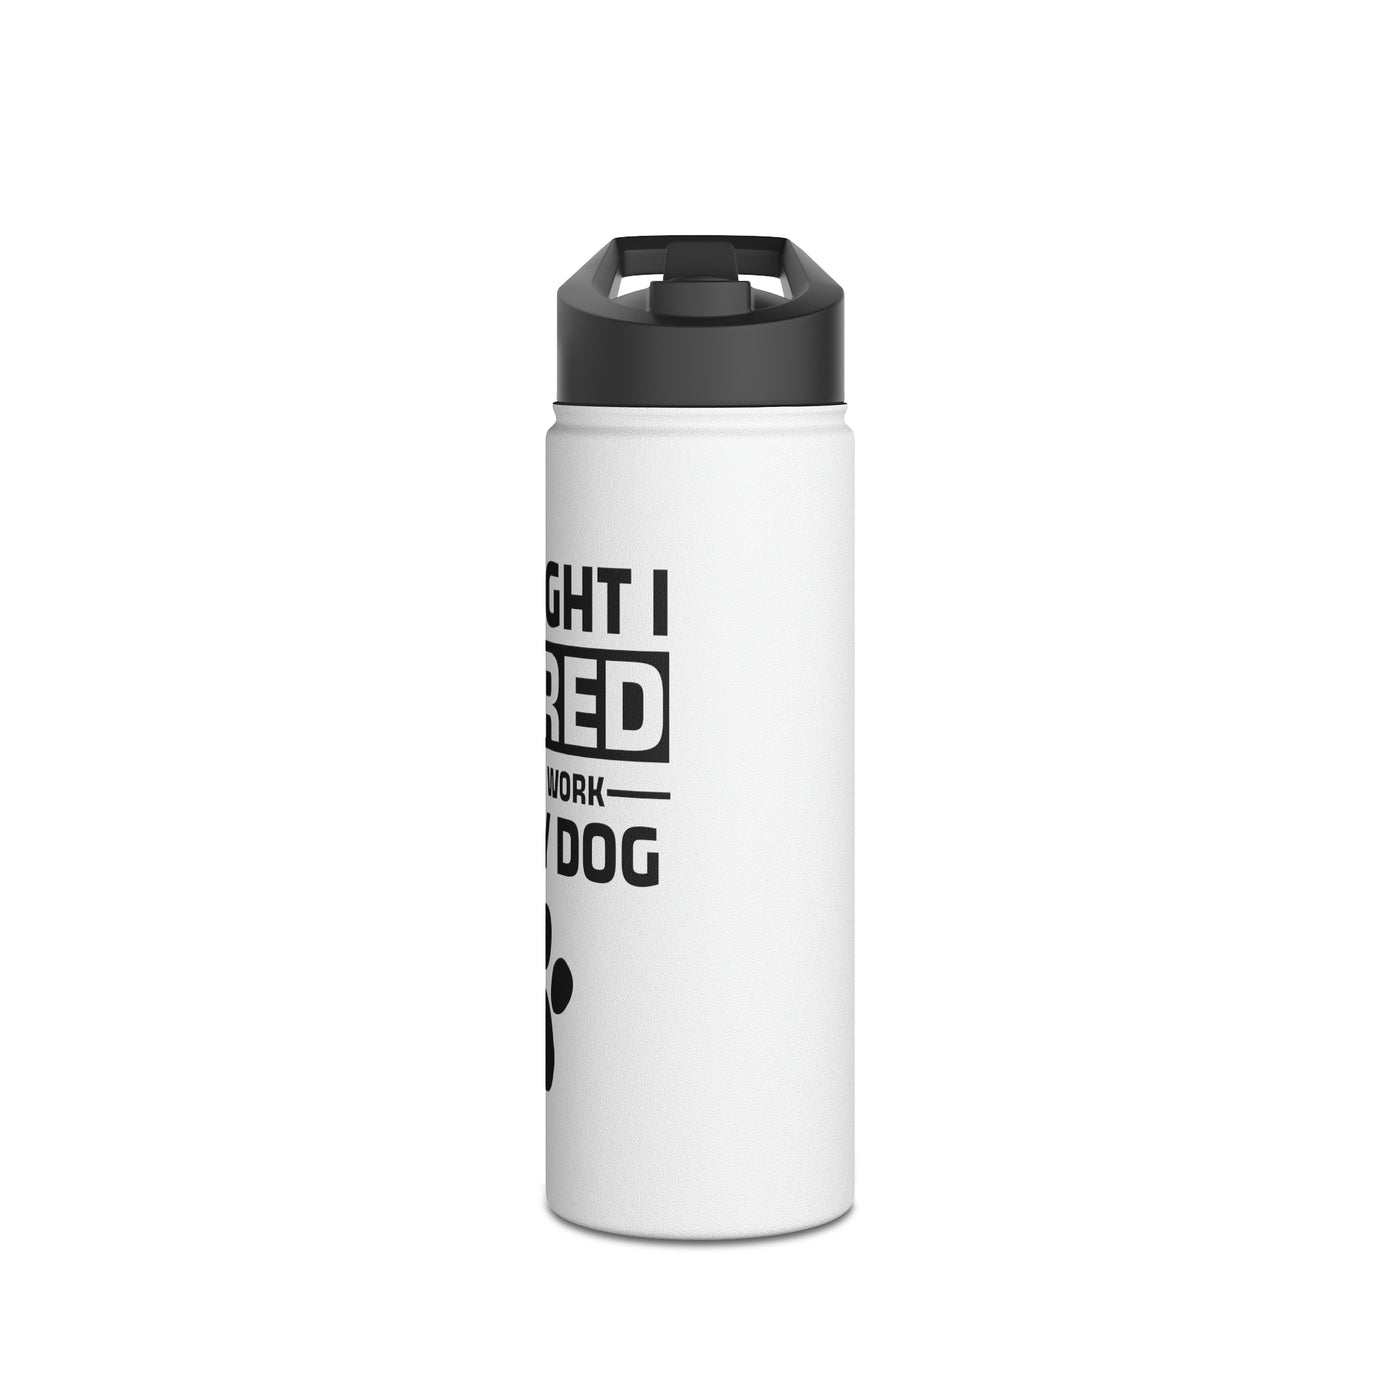 I Thought I Retired But Now I Work For My Dog Water Bottle